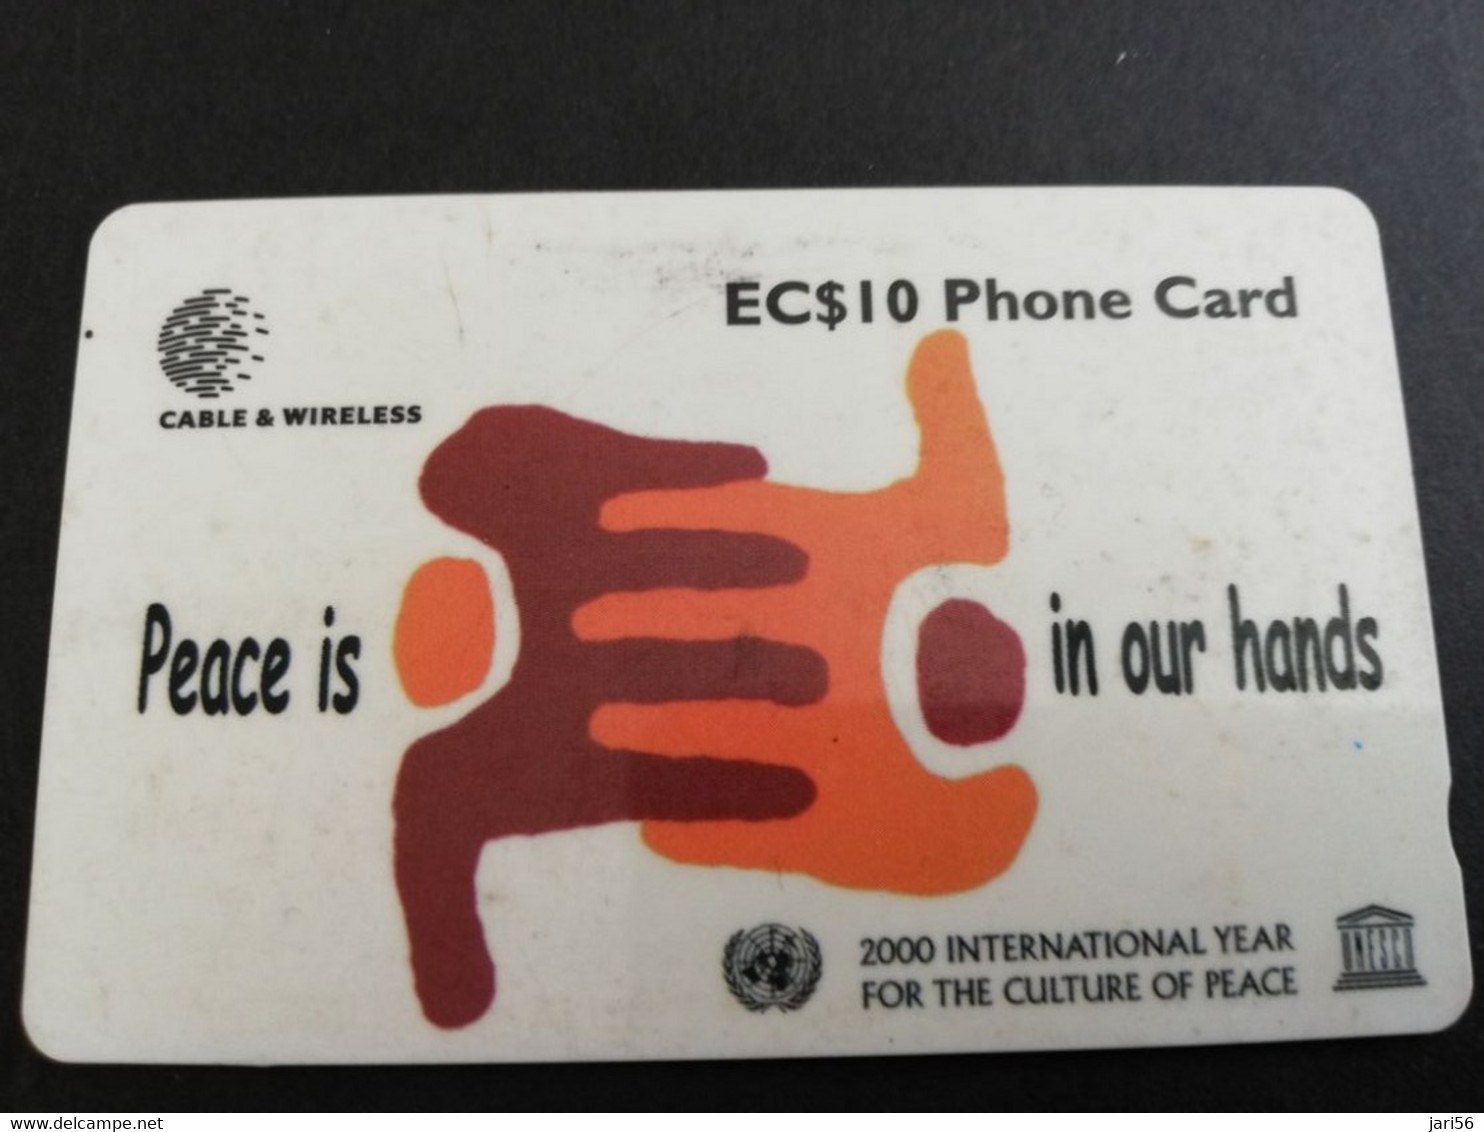 ST LUCIA    $ 10  CABLE & WIRELESS   PEACE IN OUR HANDS   338CSLB   Fine Used Card ** 5305** - Santa Lucía